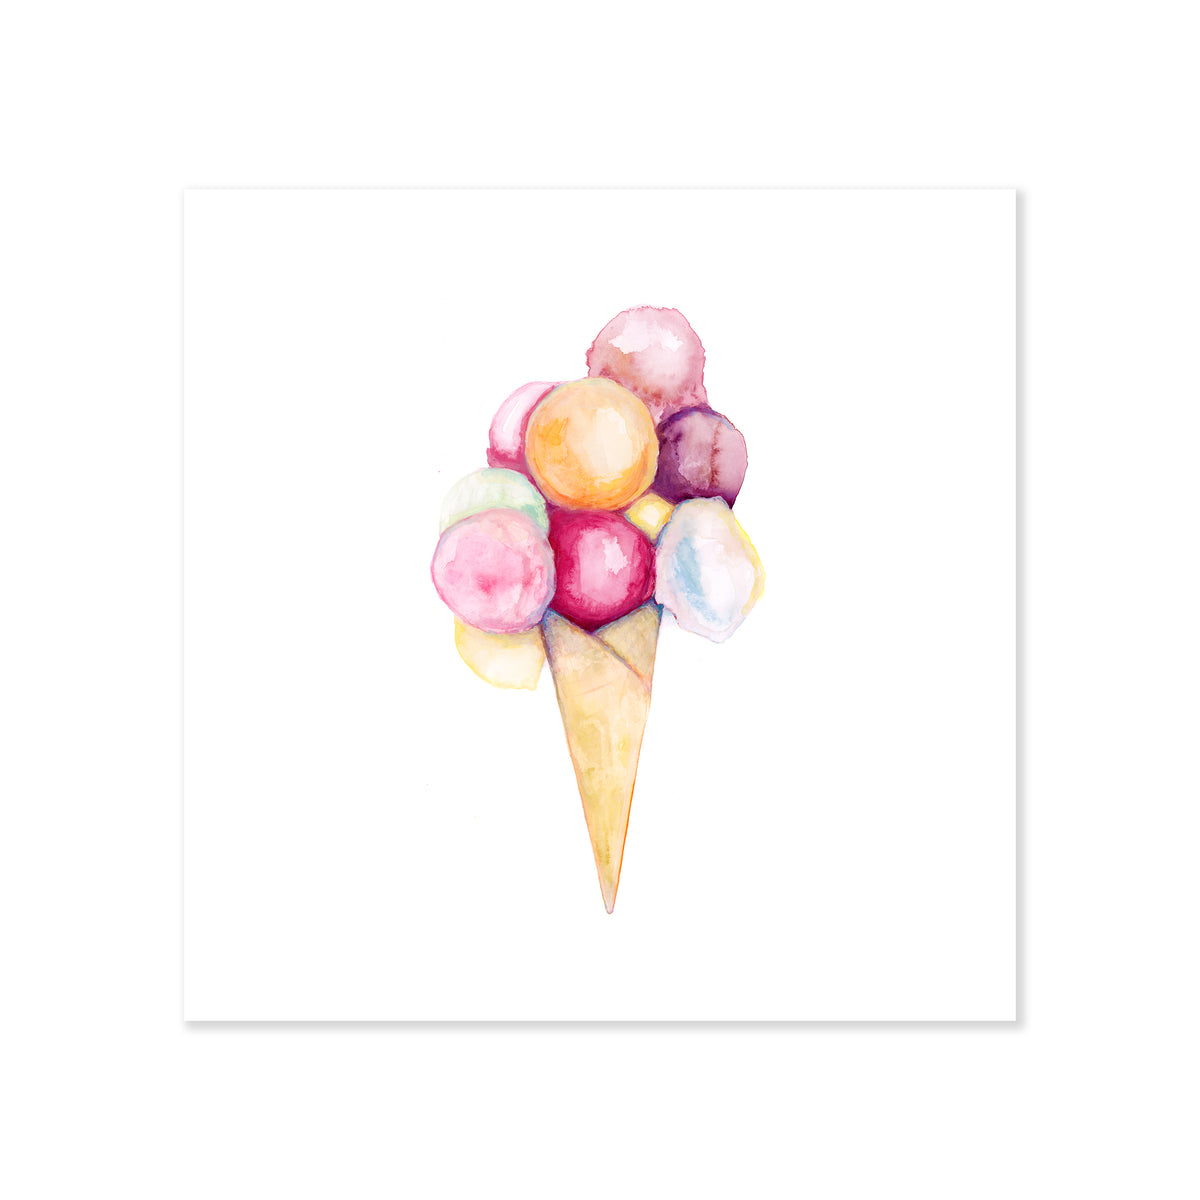  A fine art print illustrating ice cream featuring pink purple green orange and yellow scoops seated on a sugar cone painted in watercolors on a soft white background